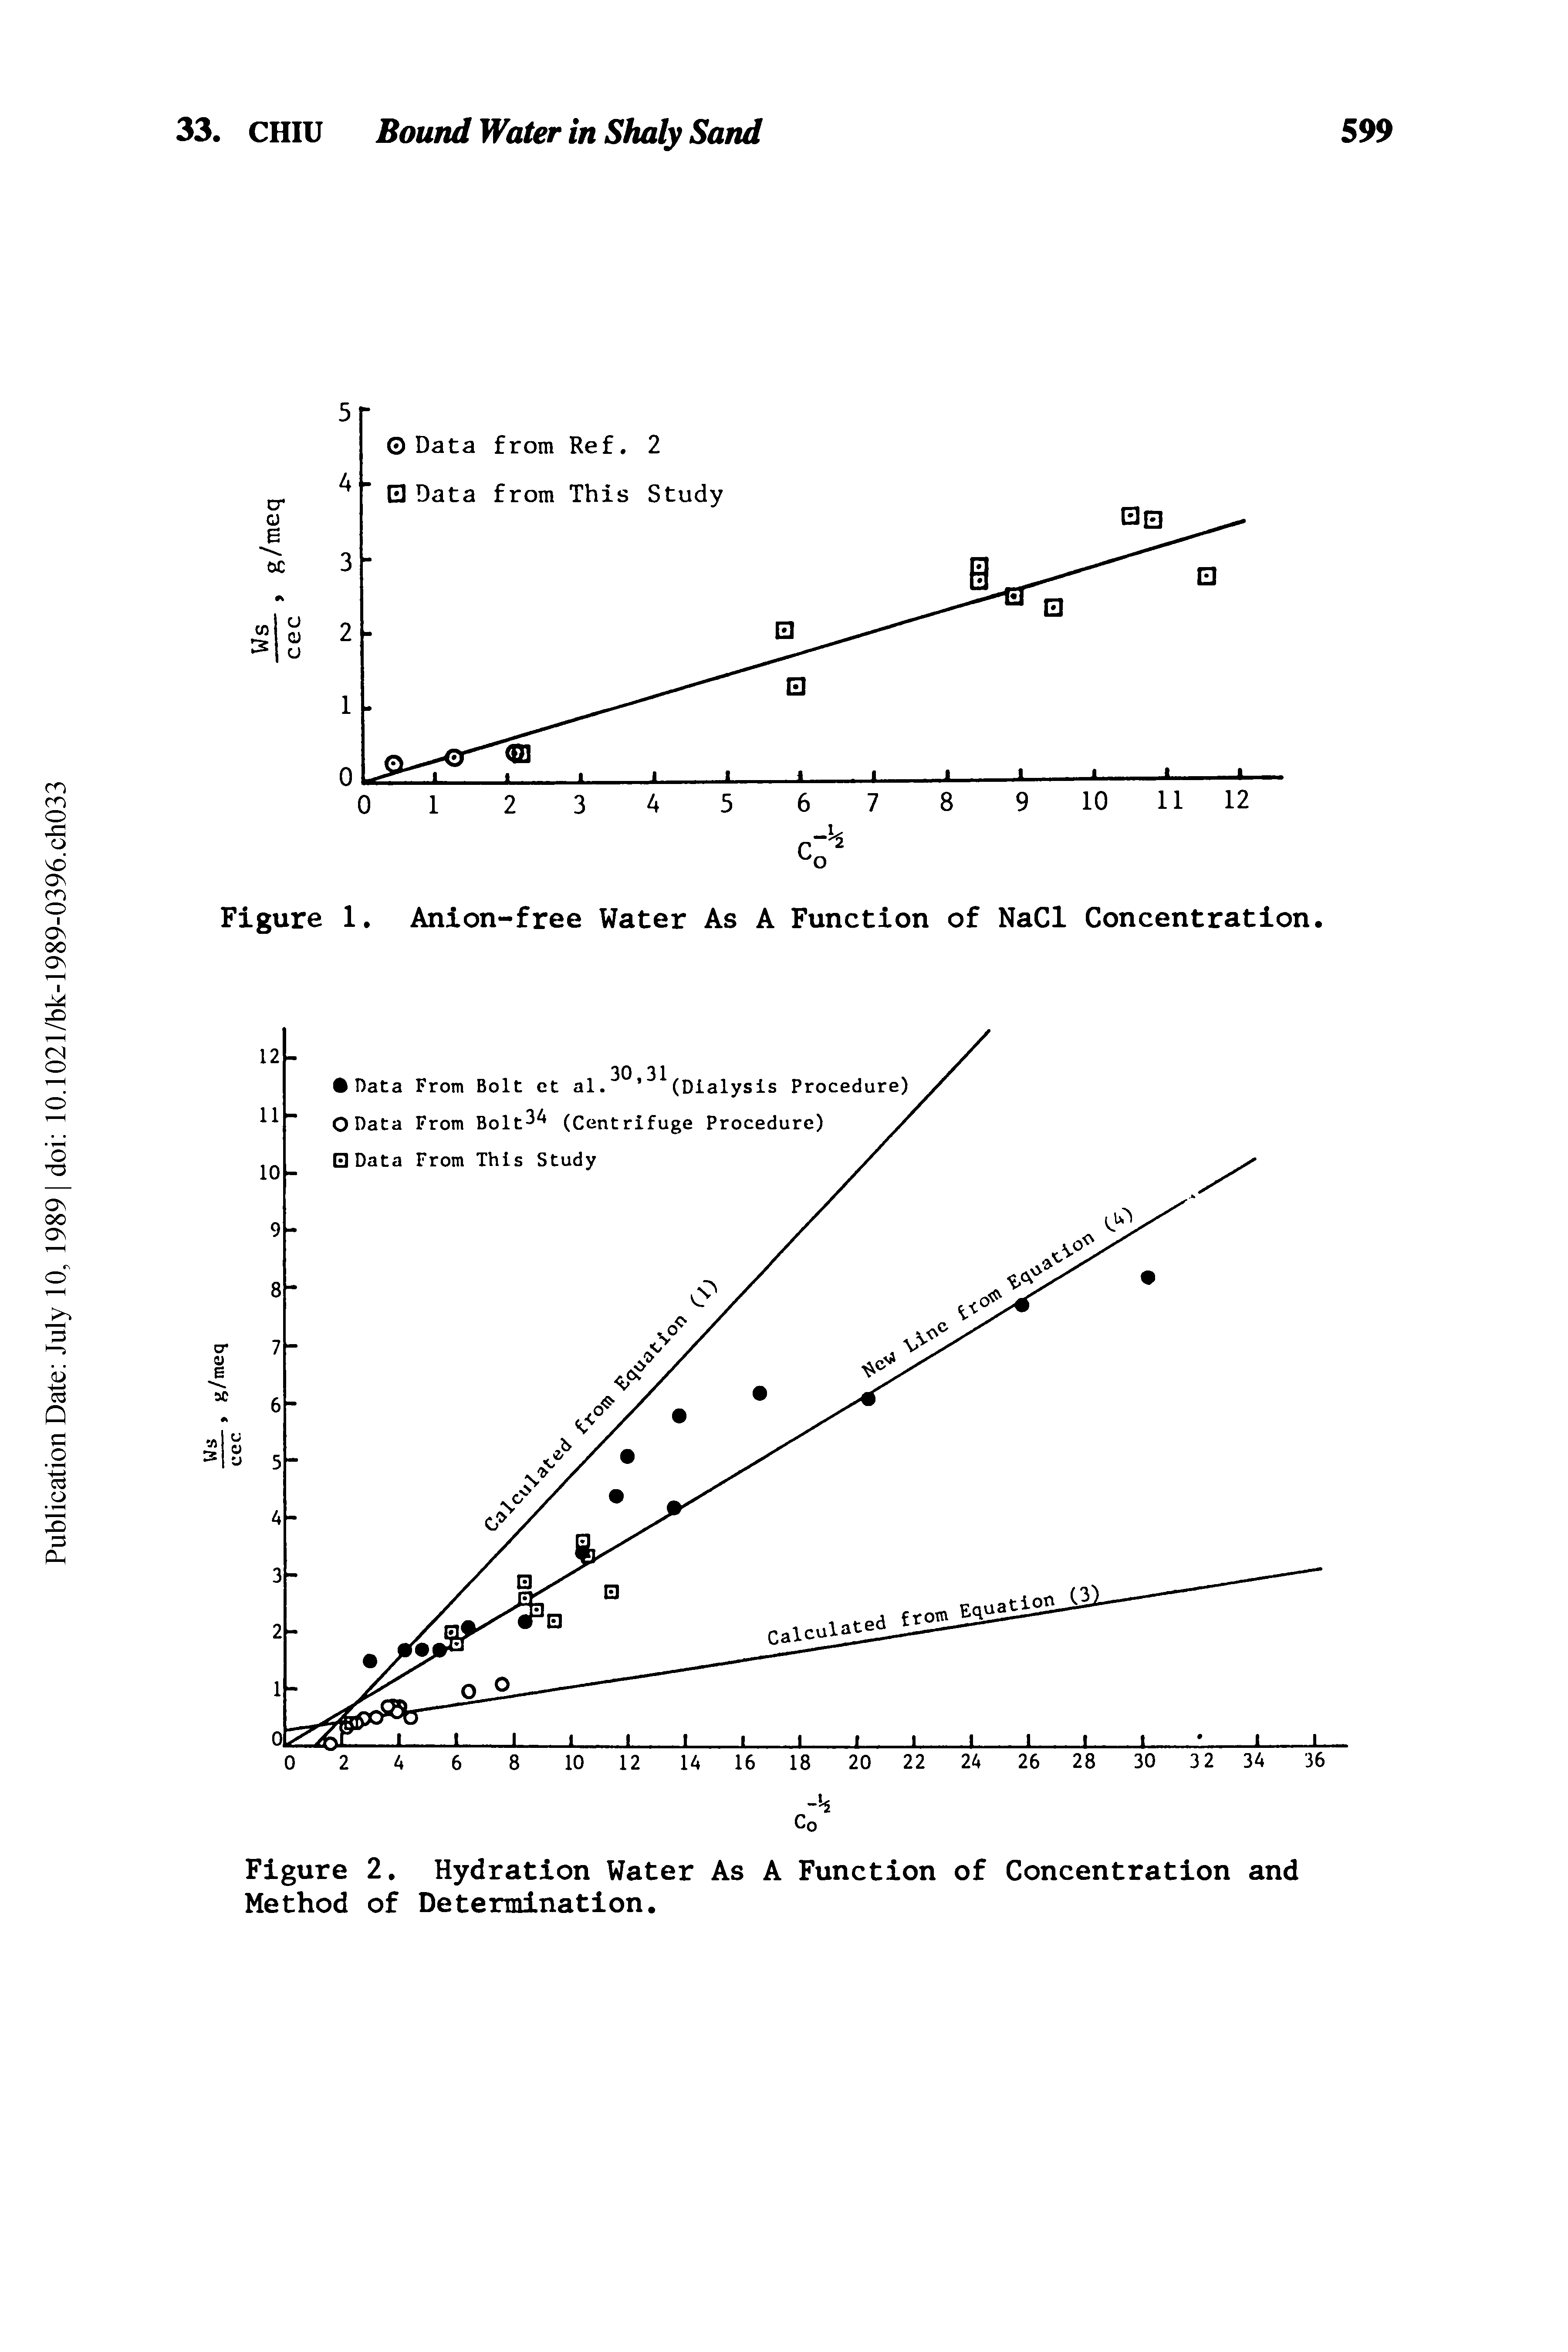 Figure 2. Hydration Water As A Function of Concentration and Method of Determination.